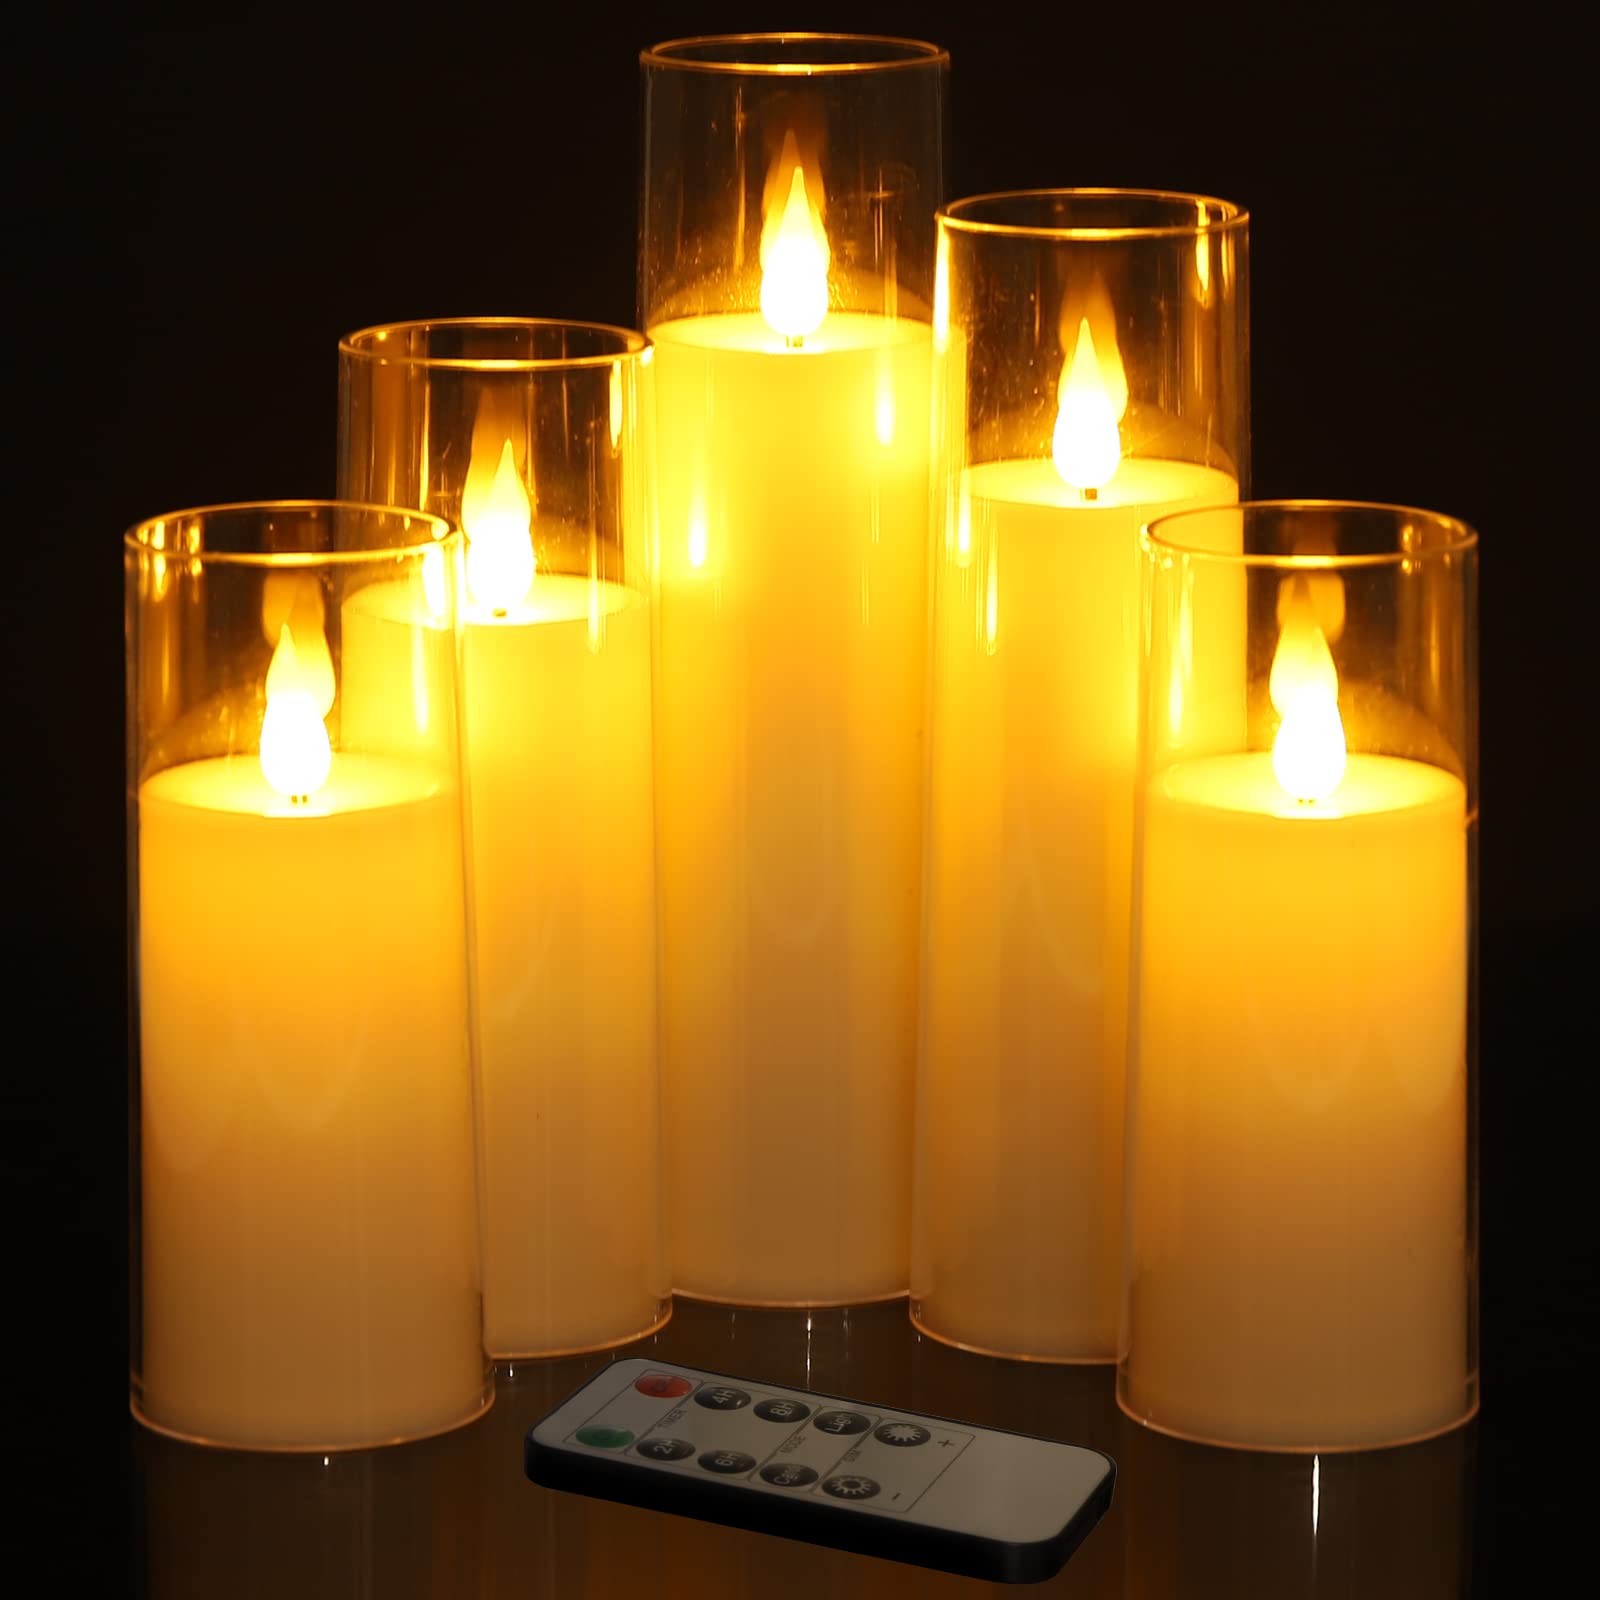 DALANG Flameless Candles,Battery Operated LED Candles Ideal for Halloween, Christmas,Home Decor,Home Party Wedding Indoor Outdoor,White2.2X5“5”6“7”8“H